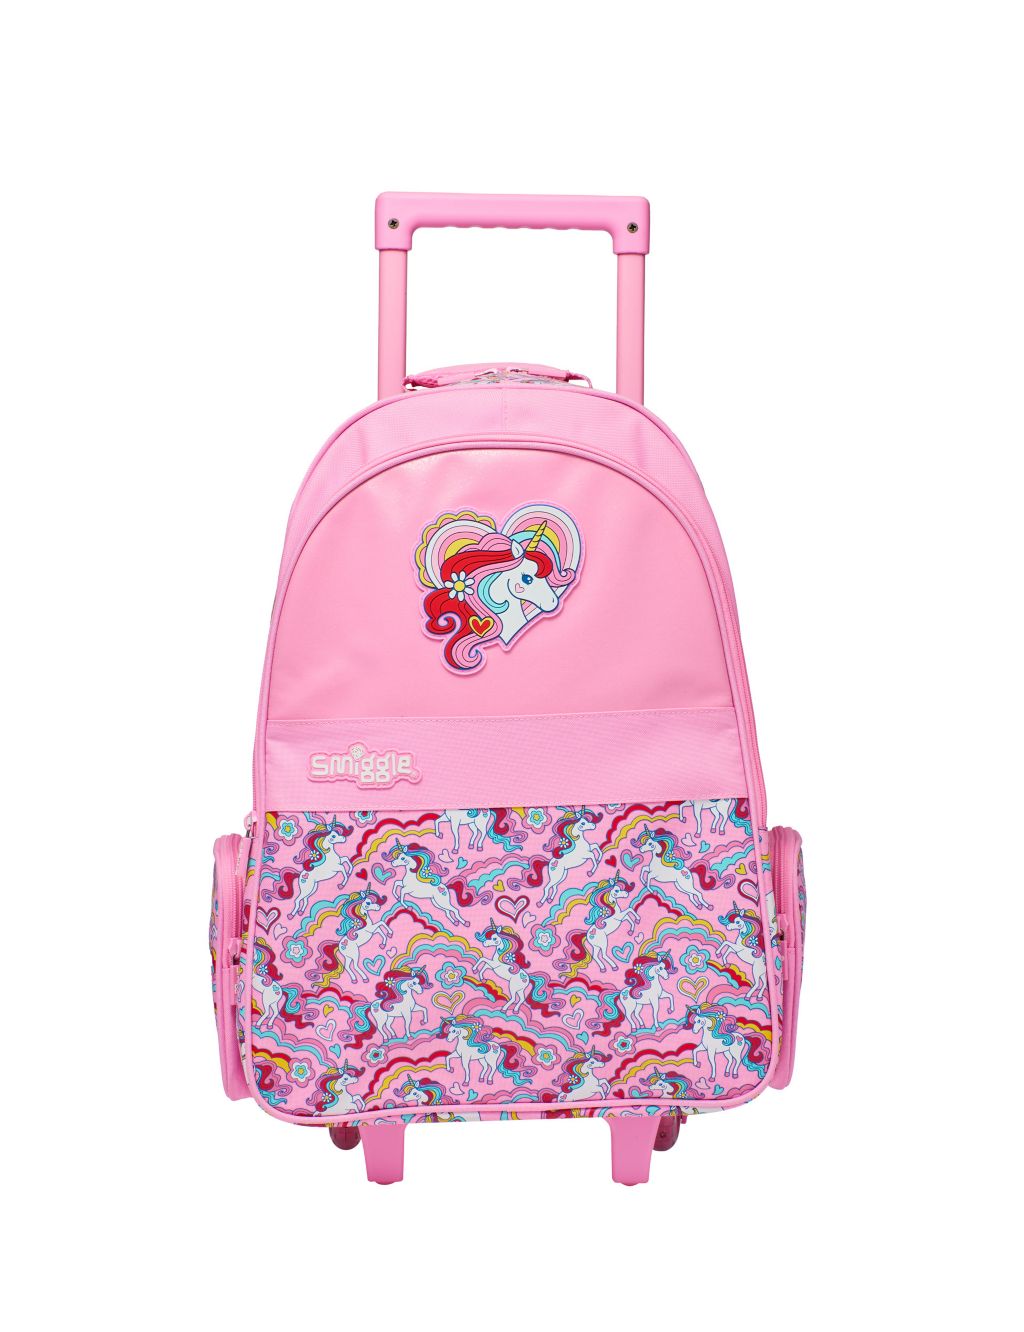 Kids' Patterned Trolley Backpack (3+ Yrs) image 1